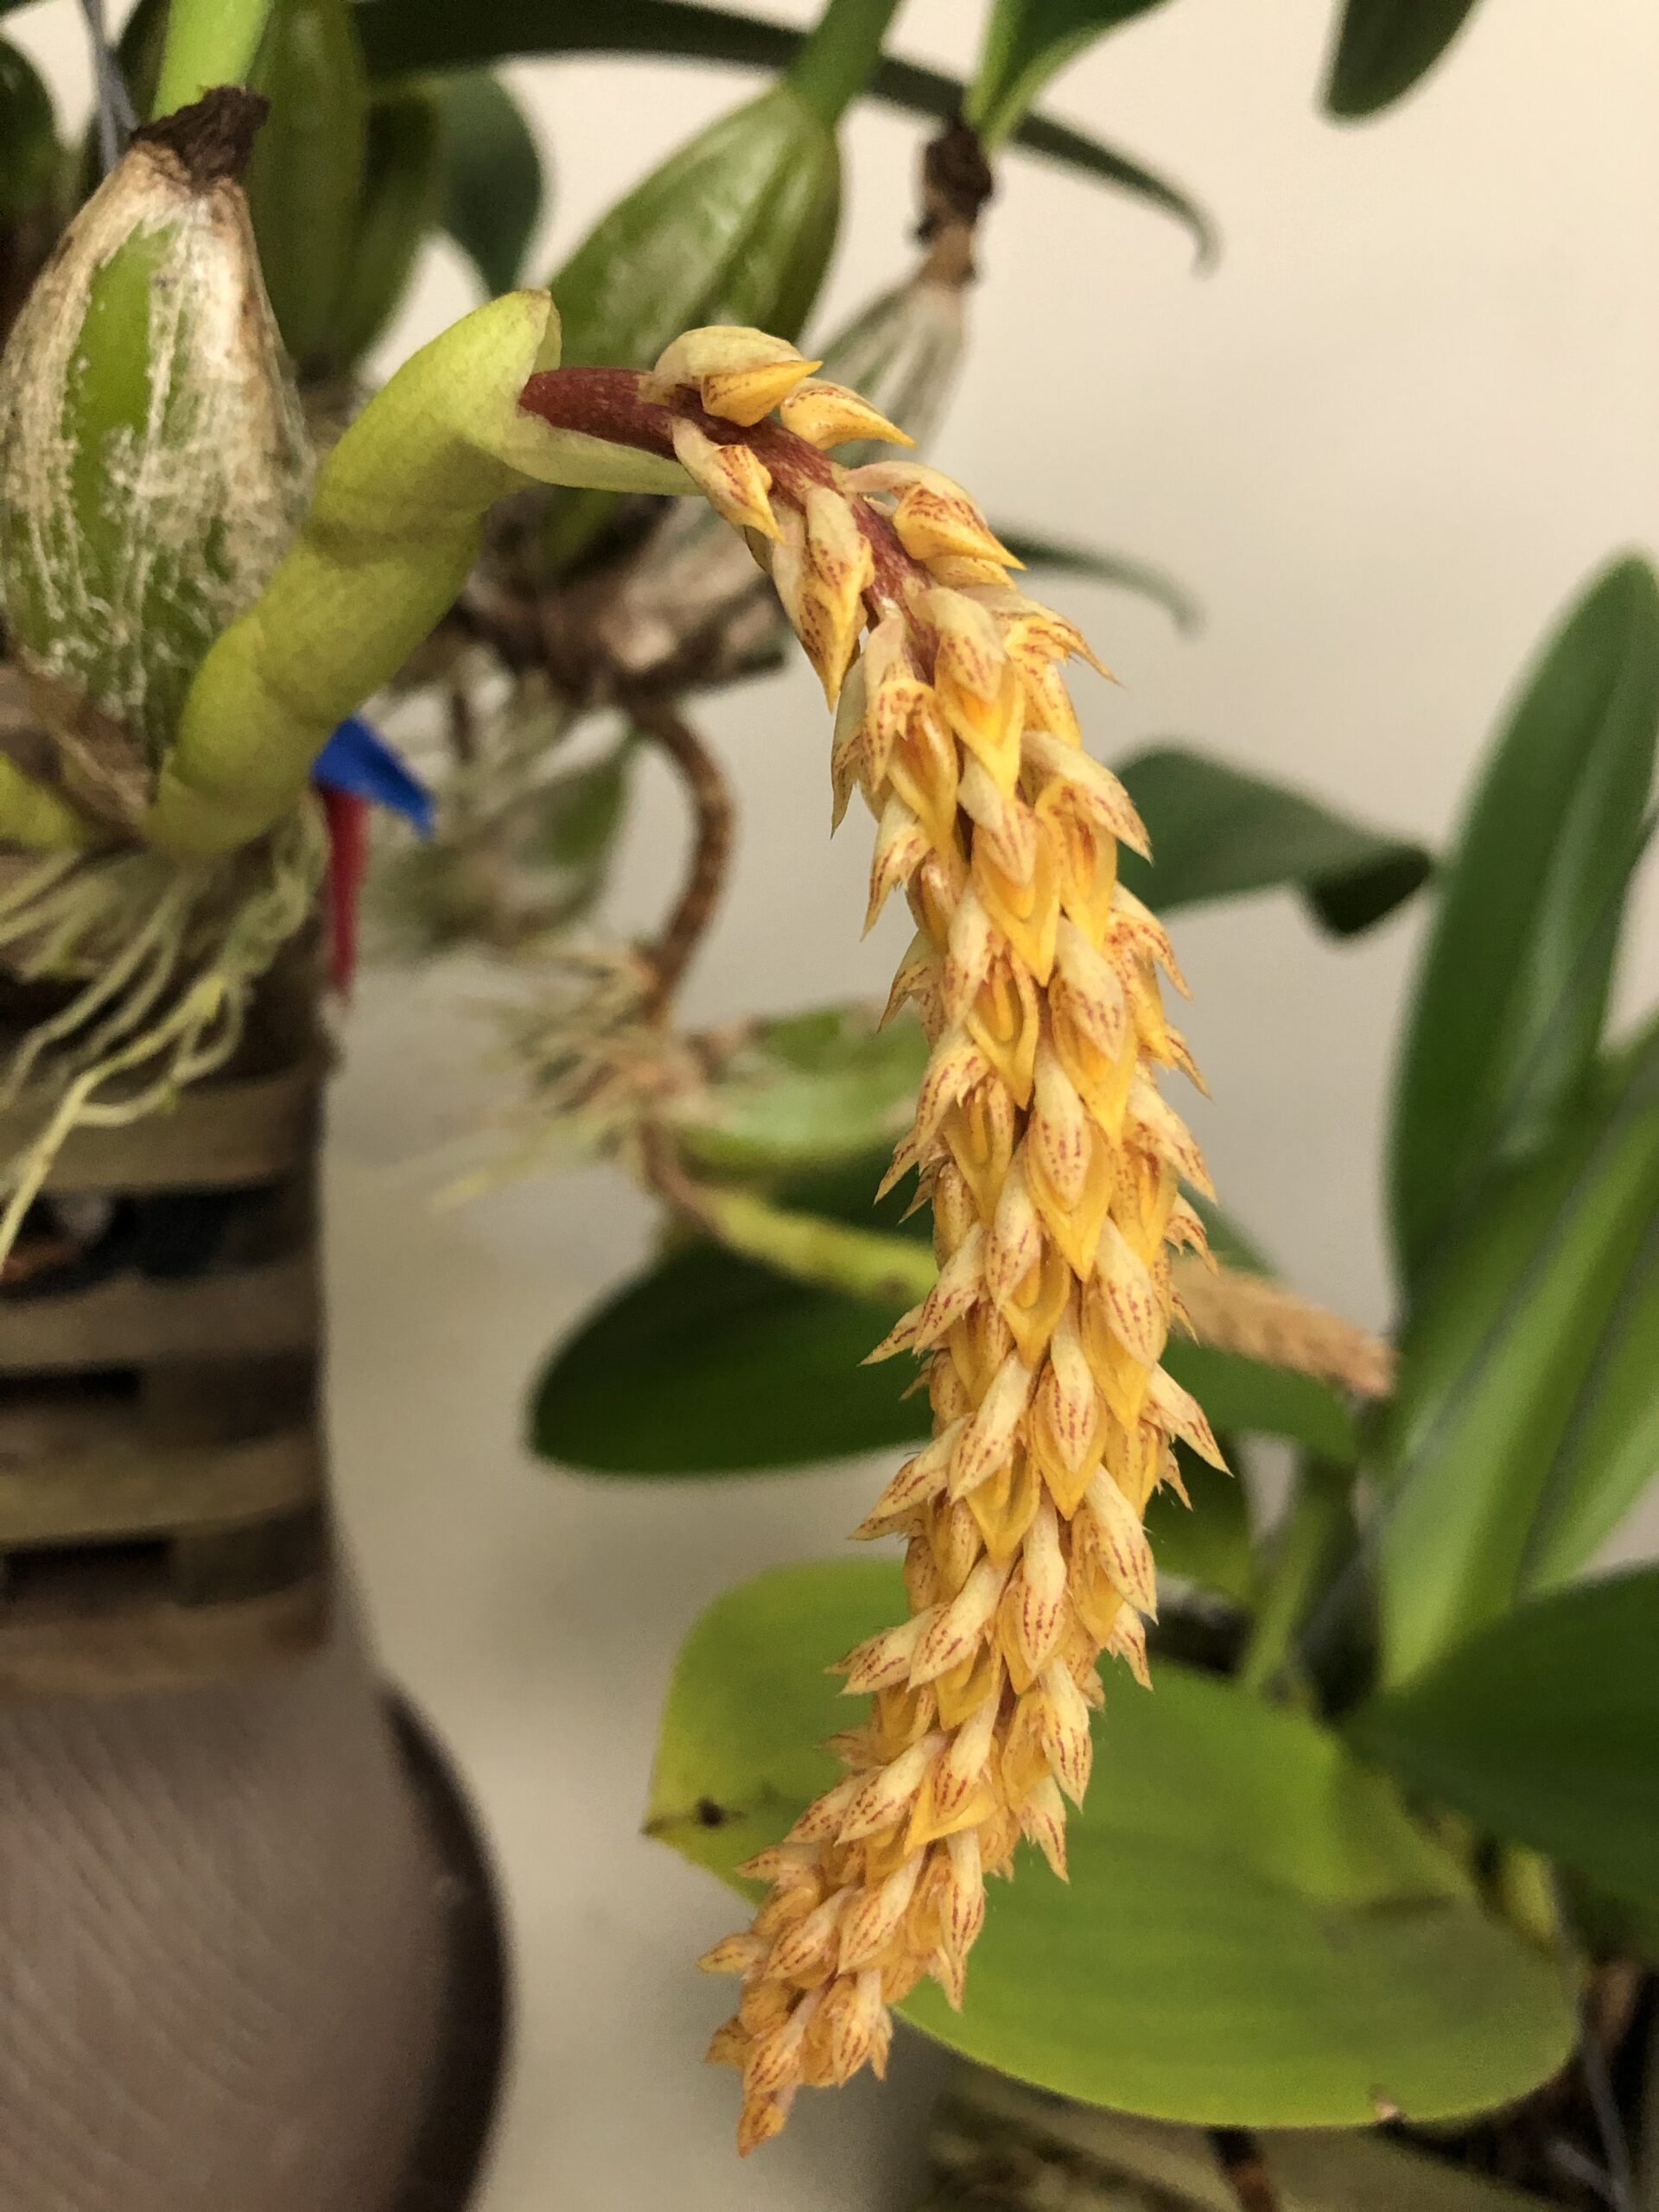 Bulbophyllum species - no name. A single inflorescence with over two dozen small yellow flowers. The inflorescence curves down from the bottom of a pseudobulb. The flowers are tightly packed along the length of the inflorescence.